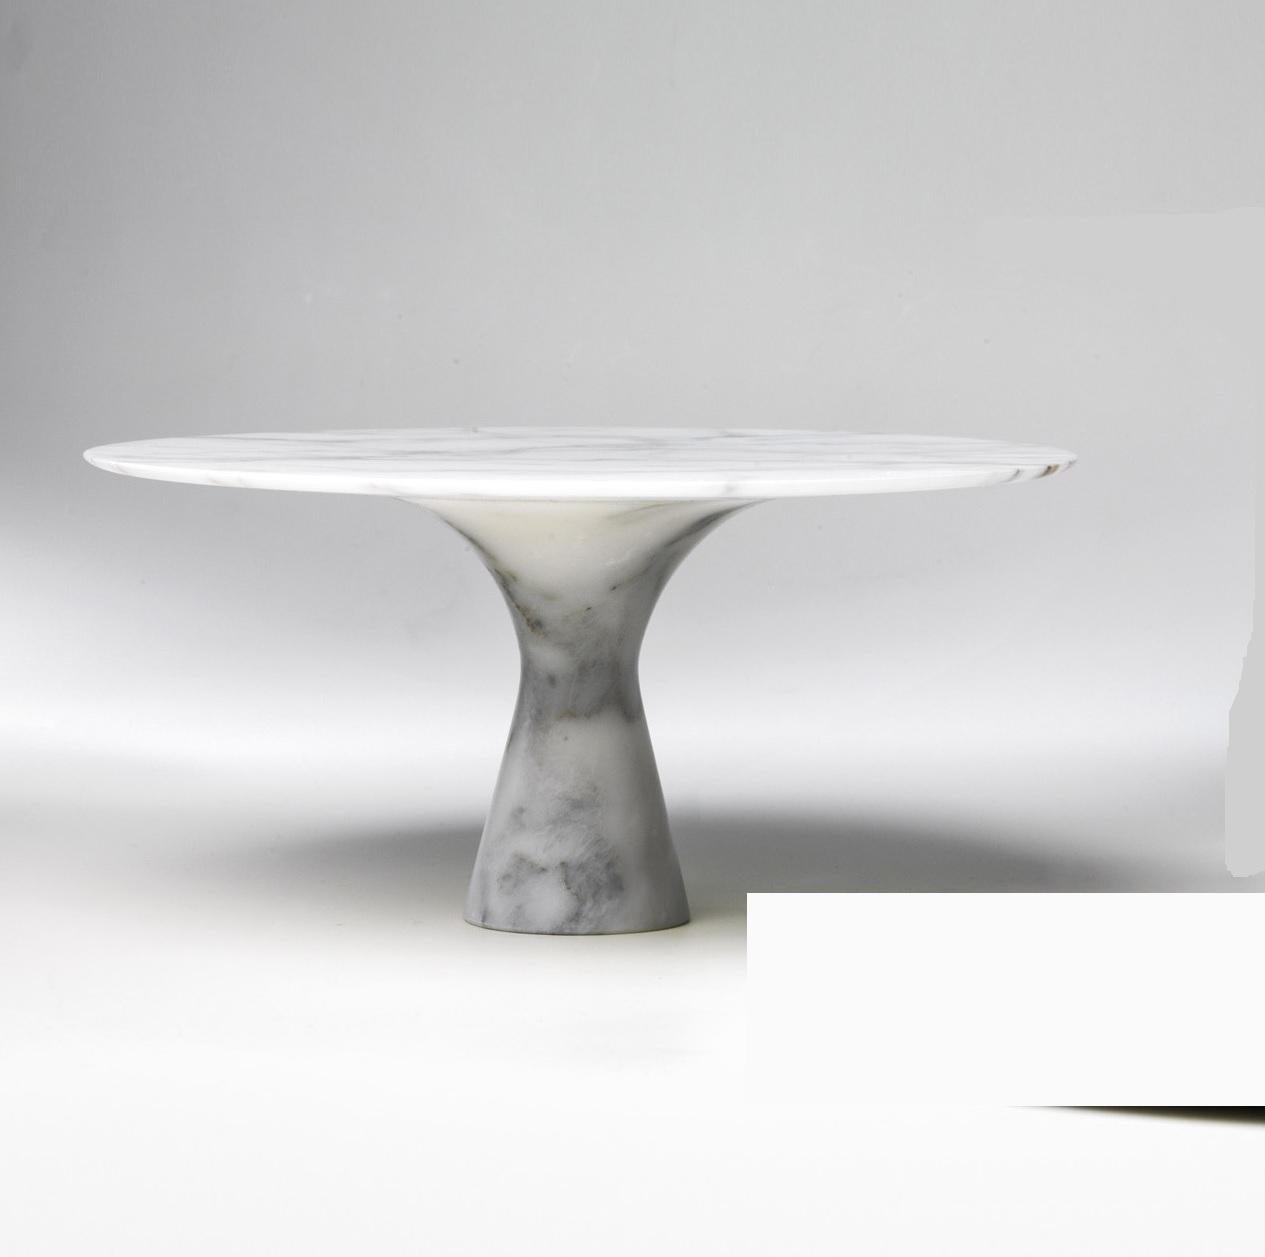 Refined Contemporary Marble 02 Bianco Statuarietto Marble Cake Stand
Signed by Leo Aerts.
Dimensions: Diameter 32 x Height 15 cm 
Material: Bianco Statuarietto marble
Technique: Polished, Carved. 
Available in marble: Kyknos, Bianco Statuarietto,